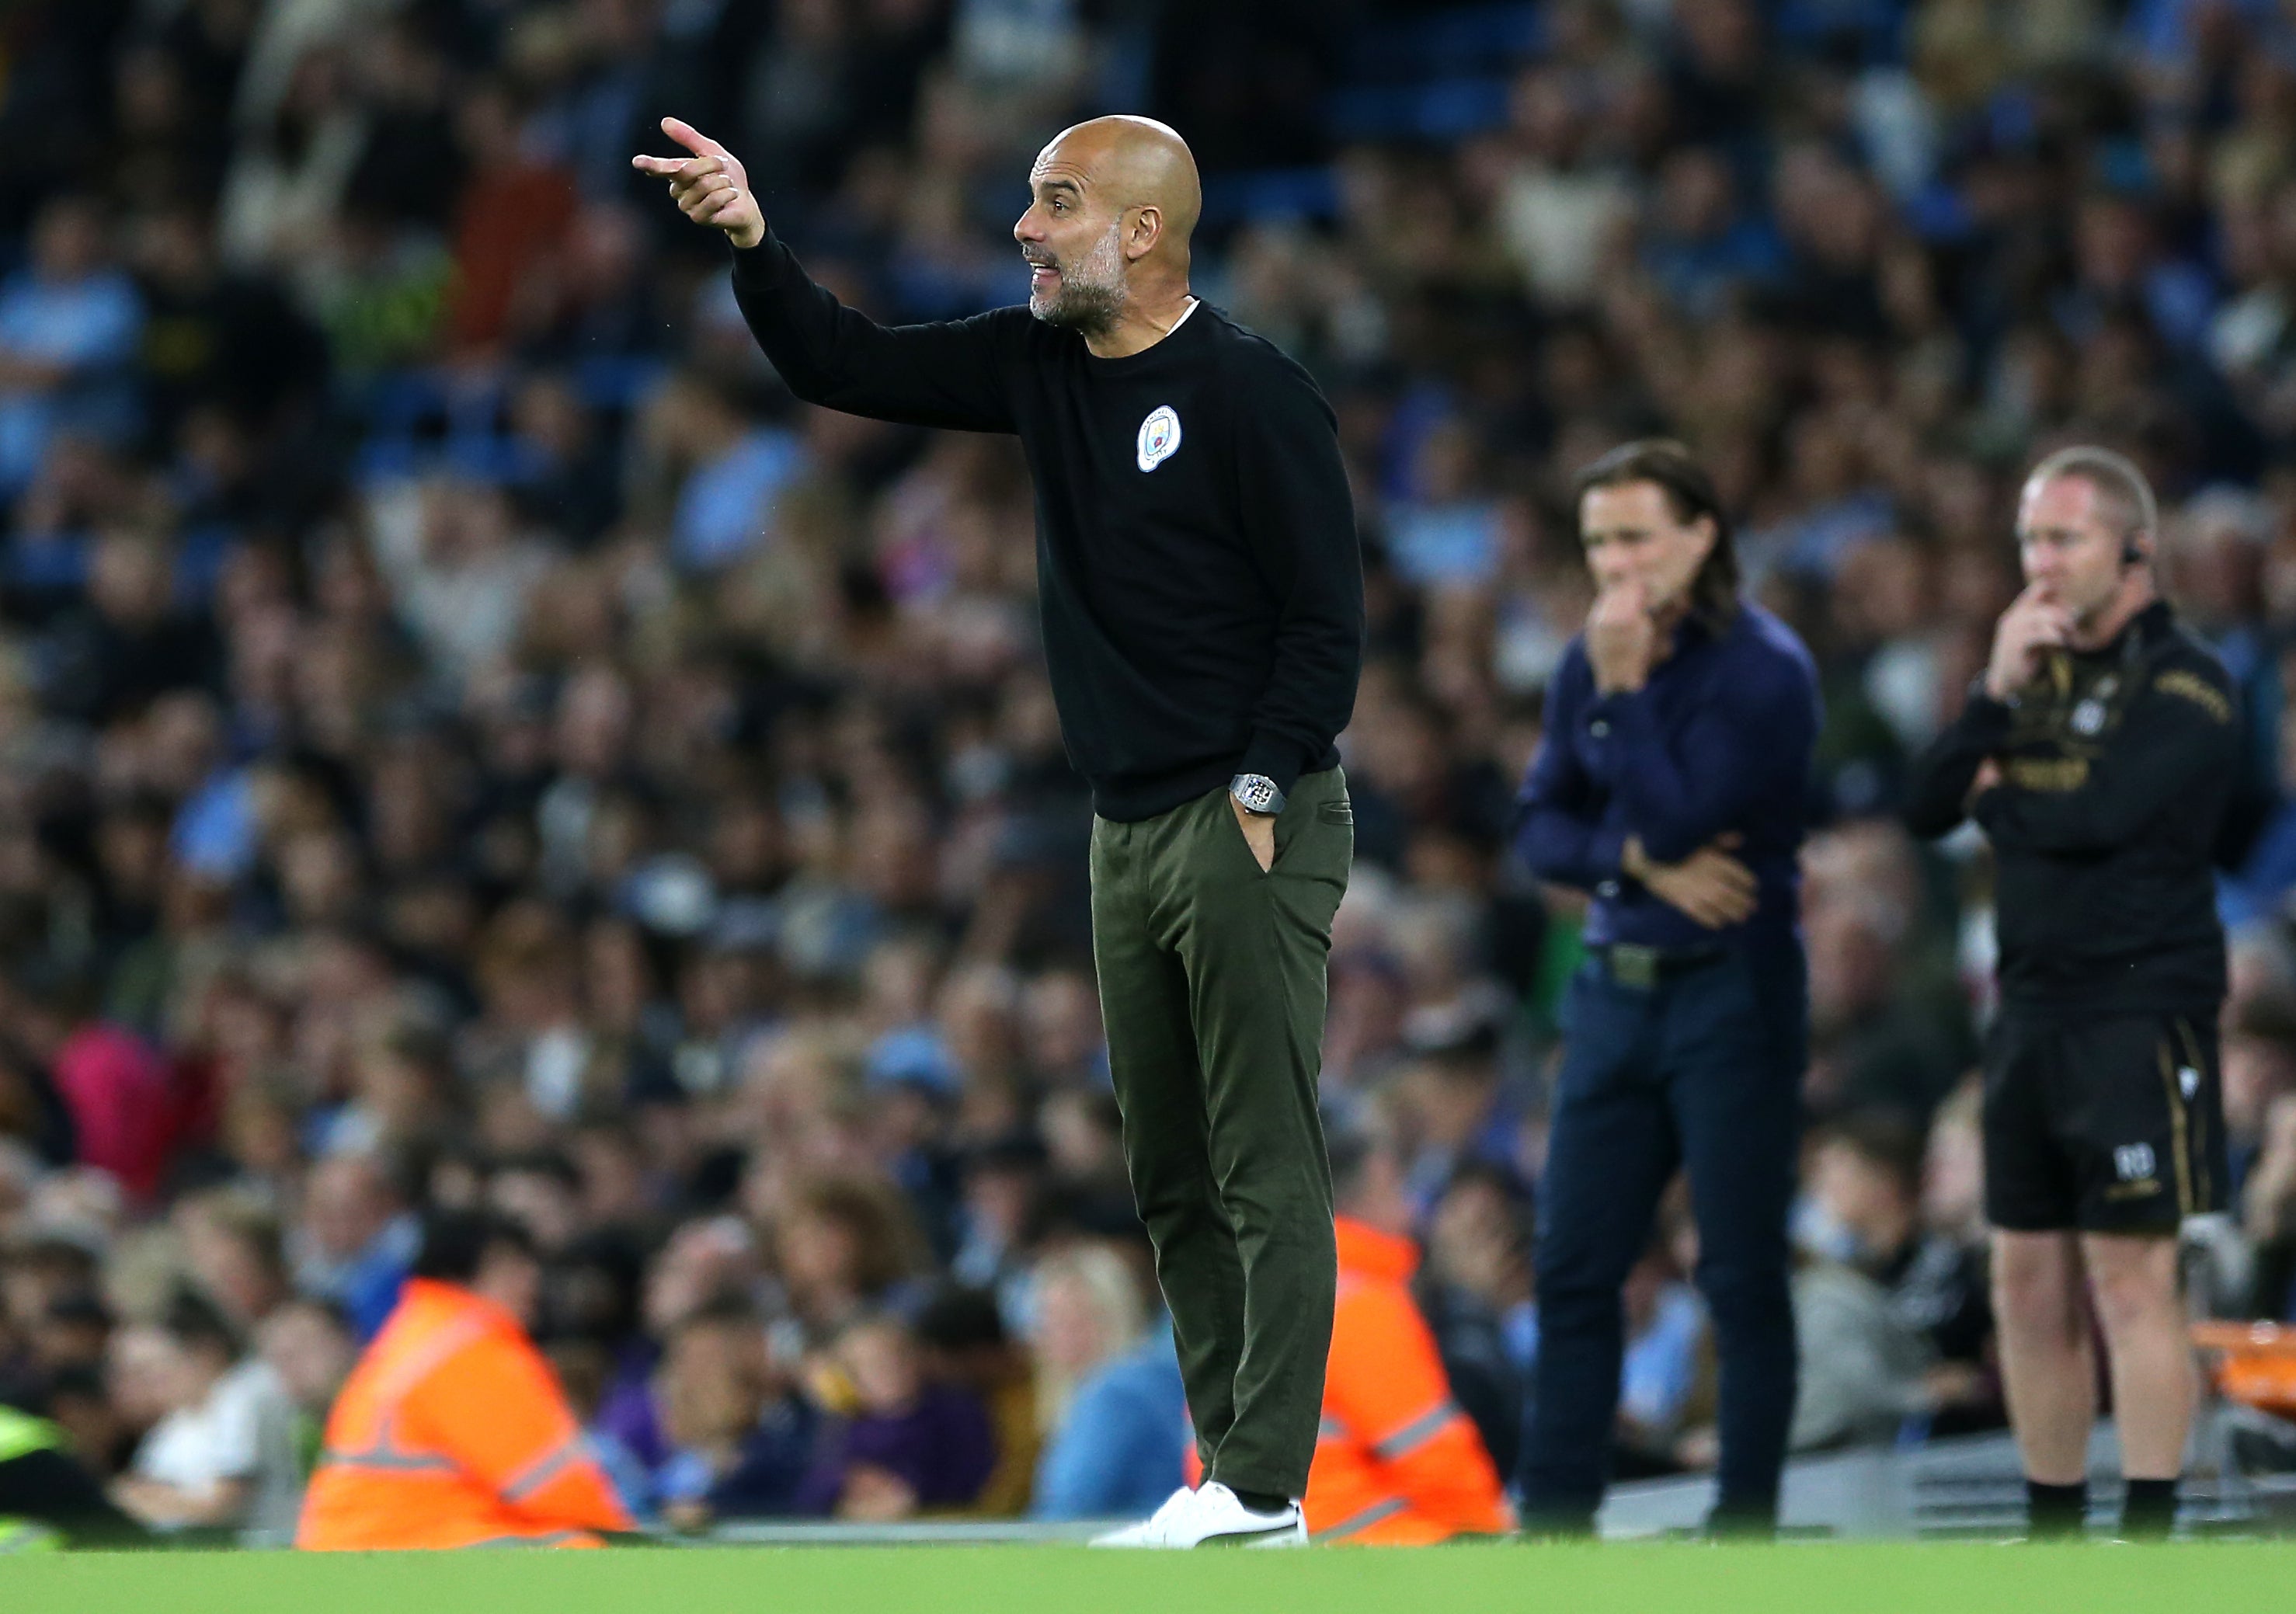 Pep Guardiola was left impressed by Manchester City’s young prospects in Tuesday’s win over Wycombe (Barrington Coombs/PA)